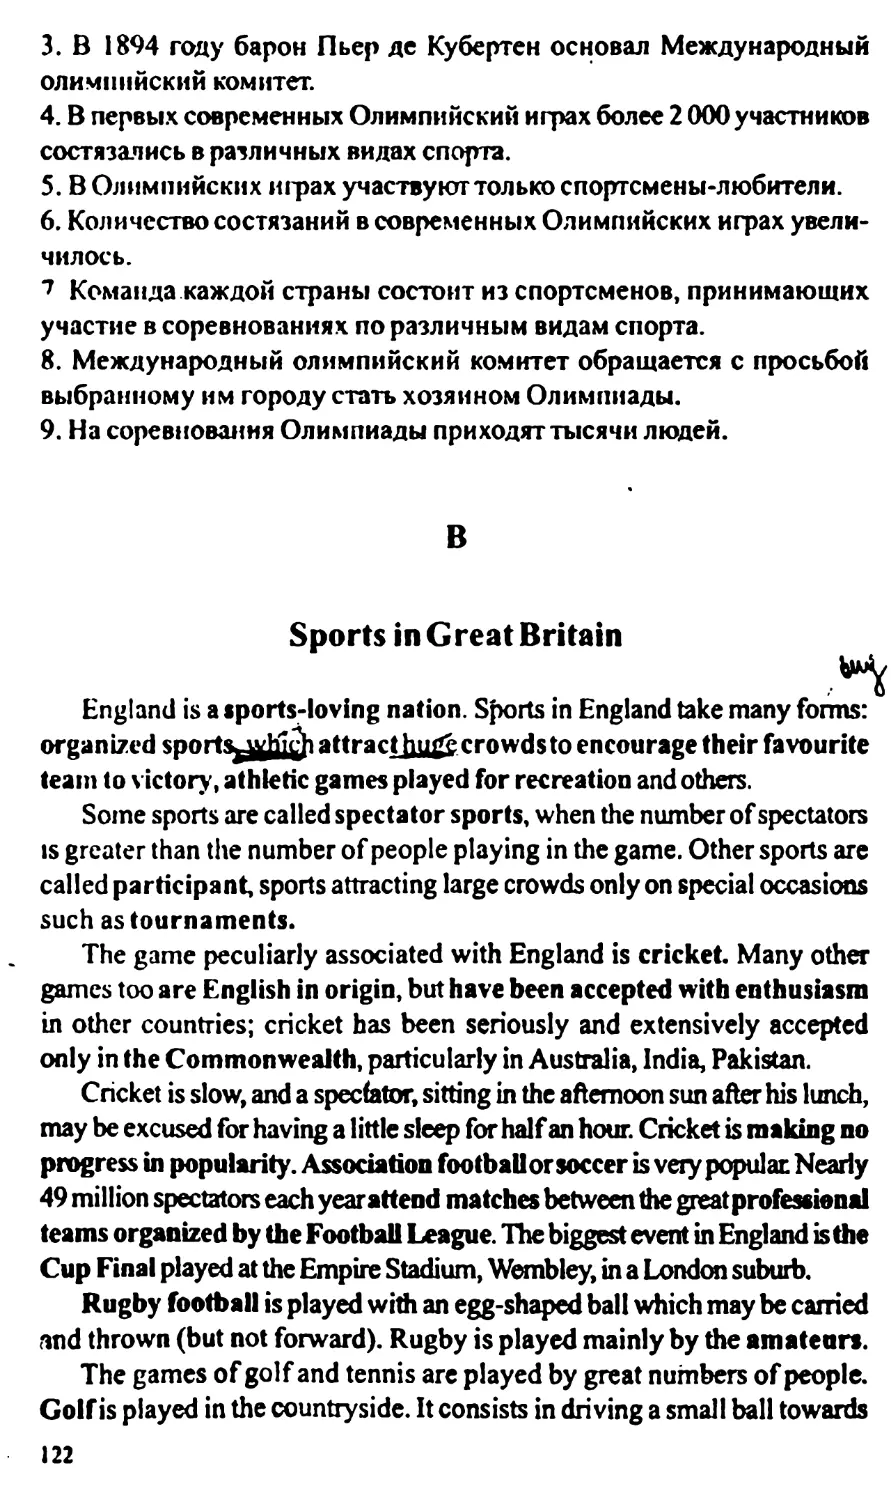 B. Sports in Great Britain